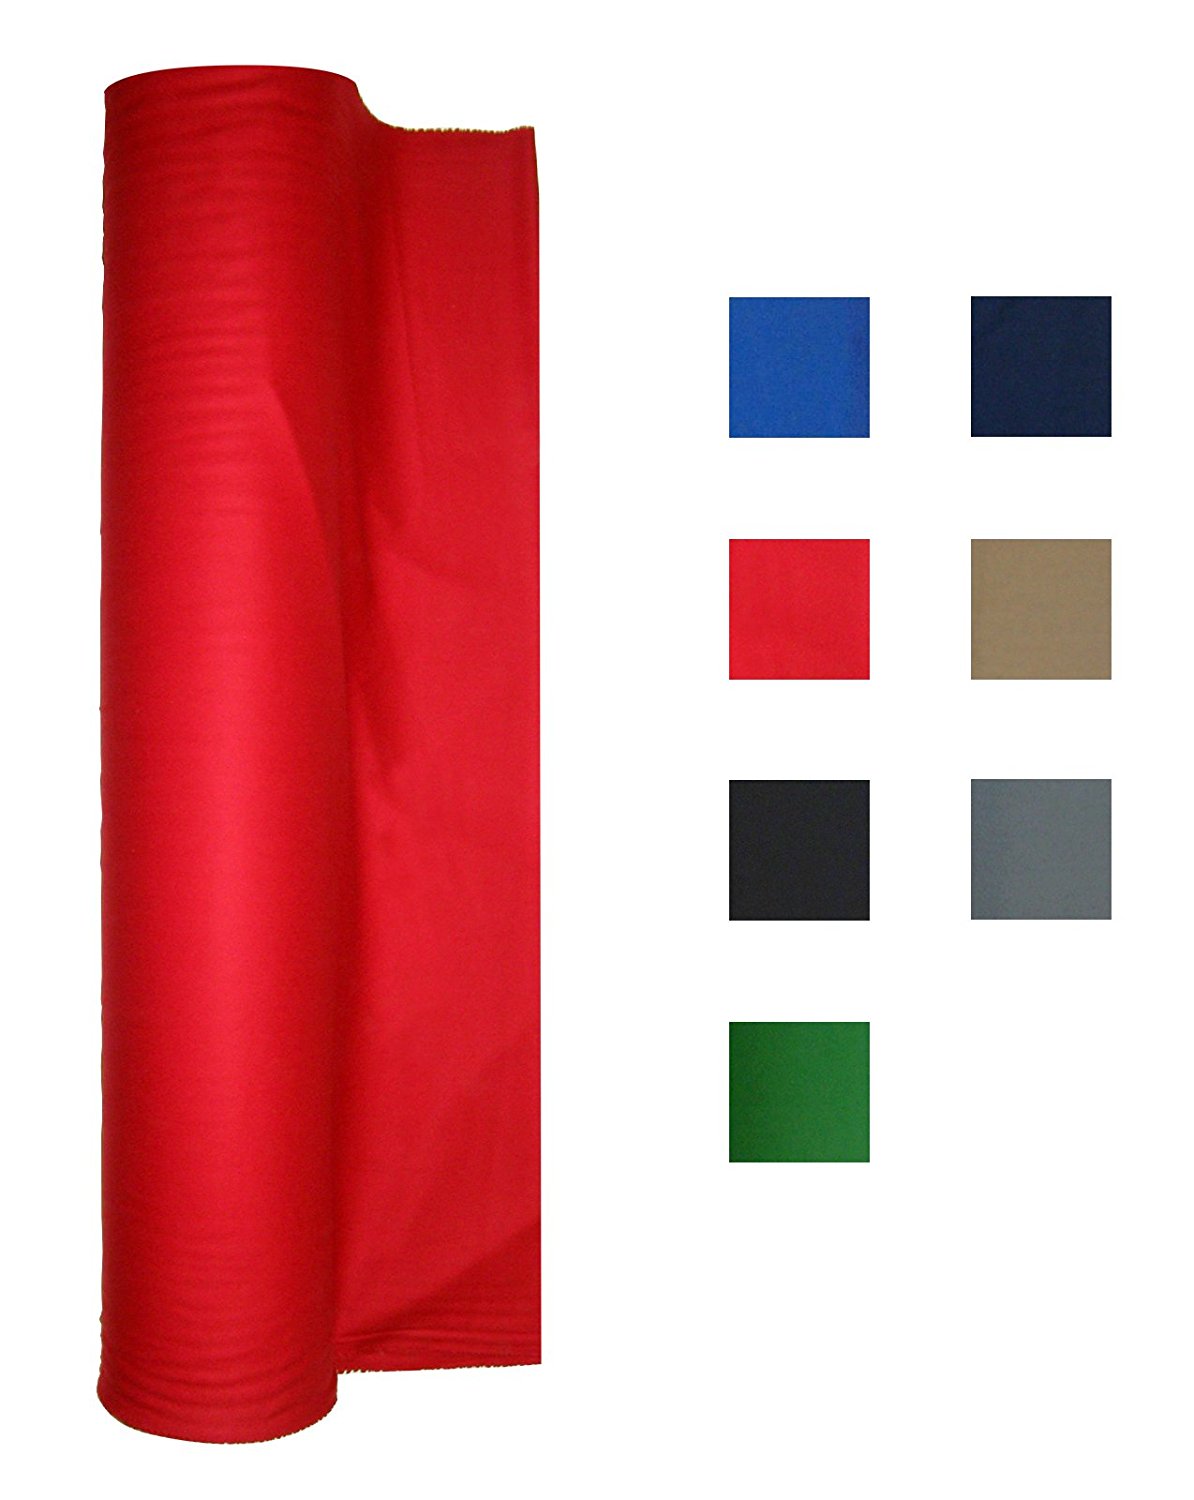 21 Ounce Pool Table - Billiard Cloth - Felt Priced Per Foot Choose From English Green, Blue, Navy Blue, Black, Red or Tan (Red)